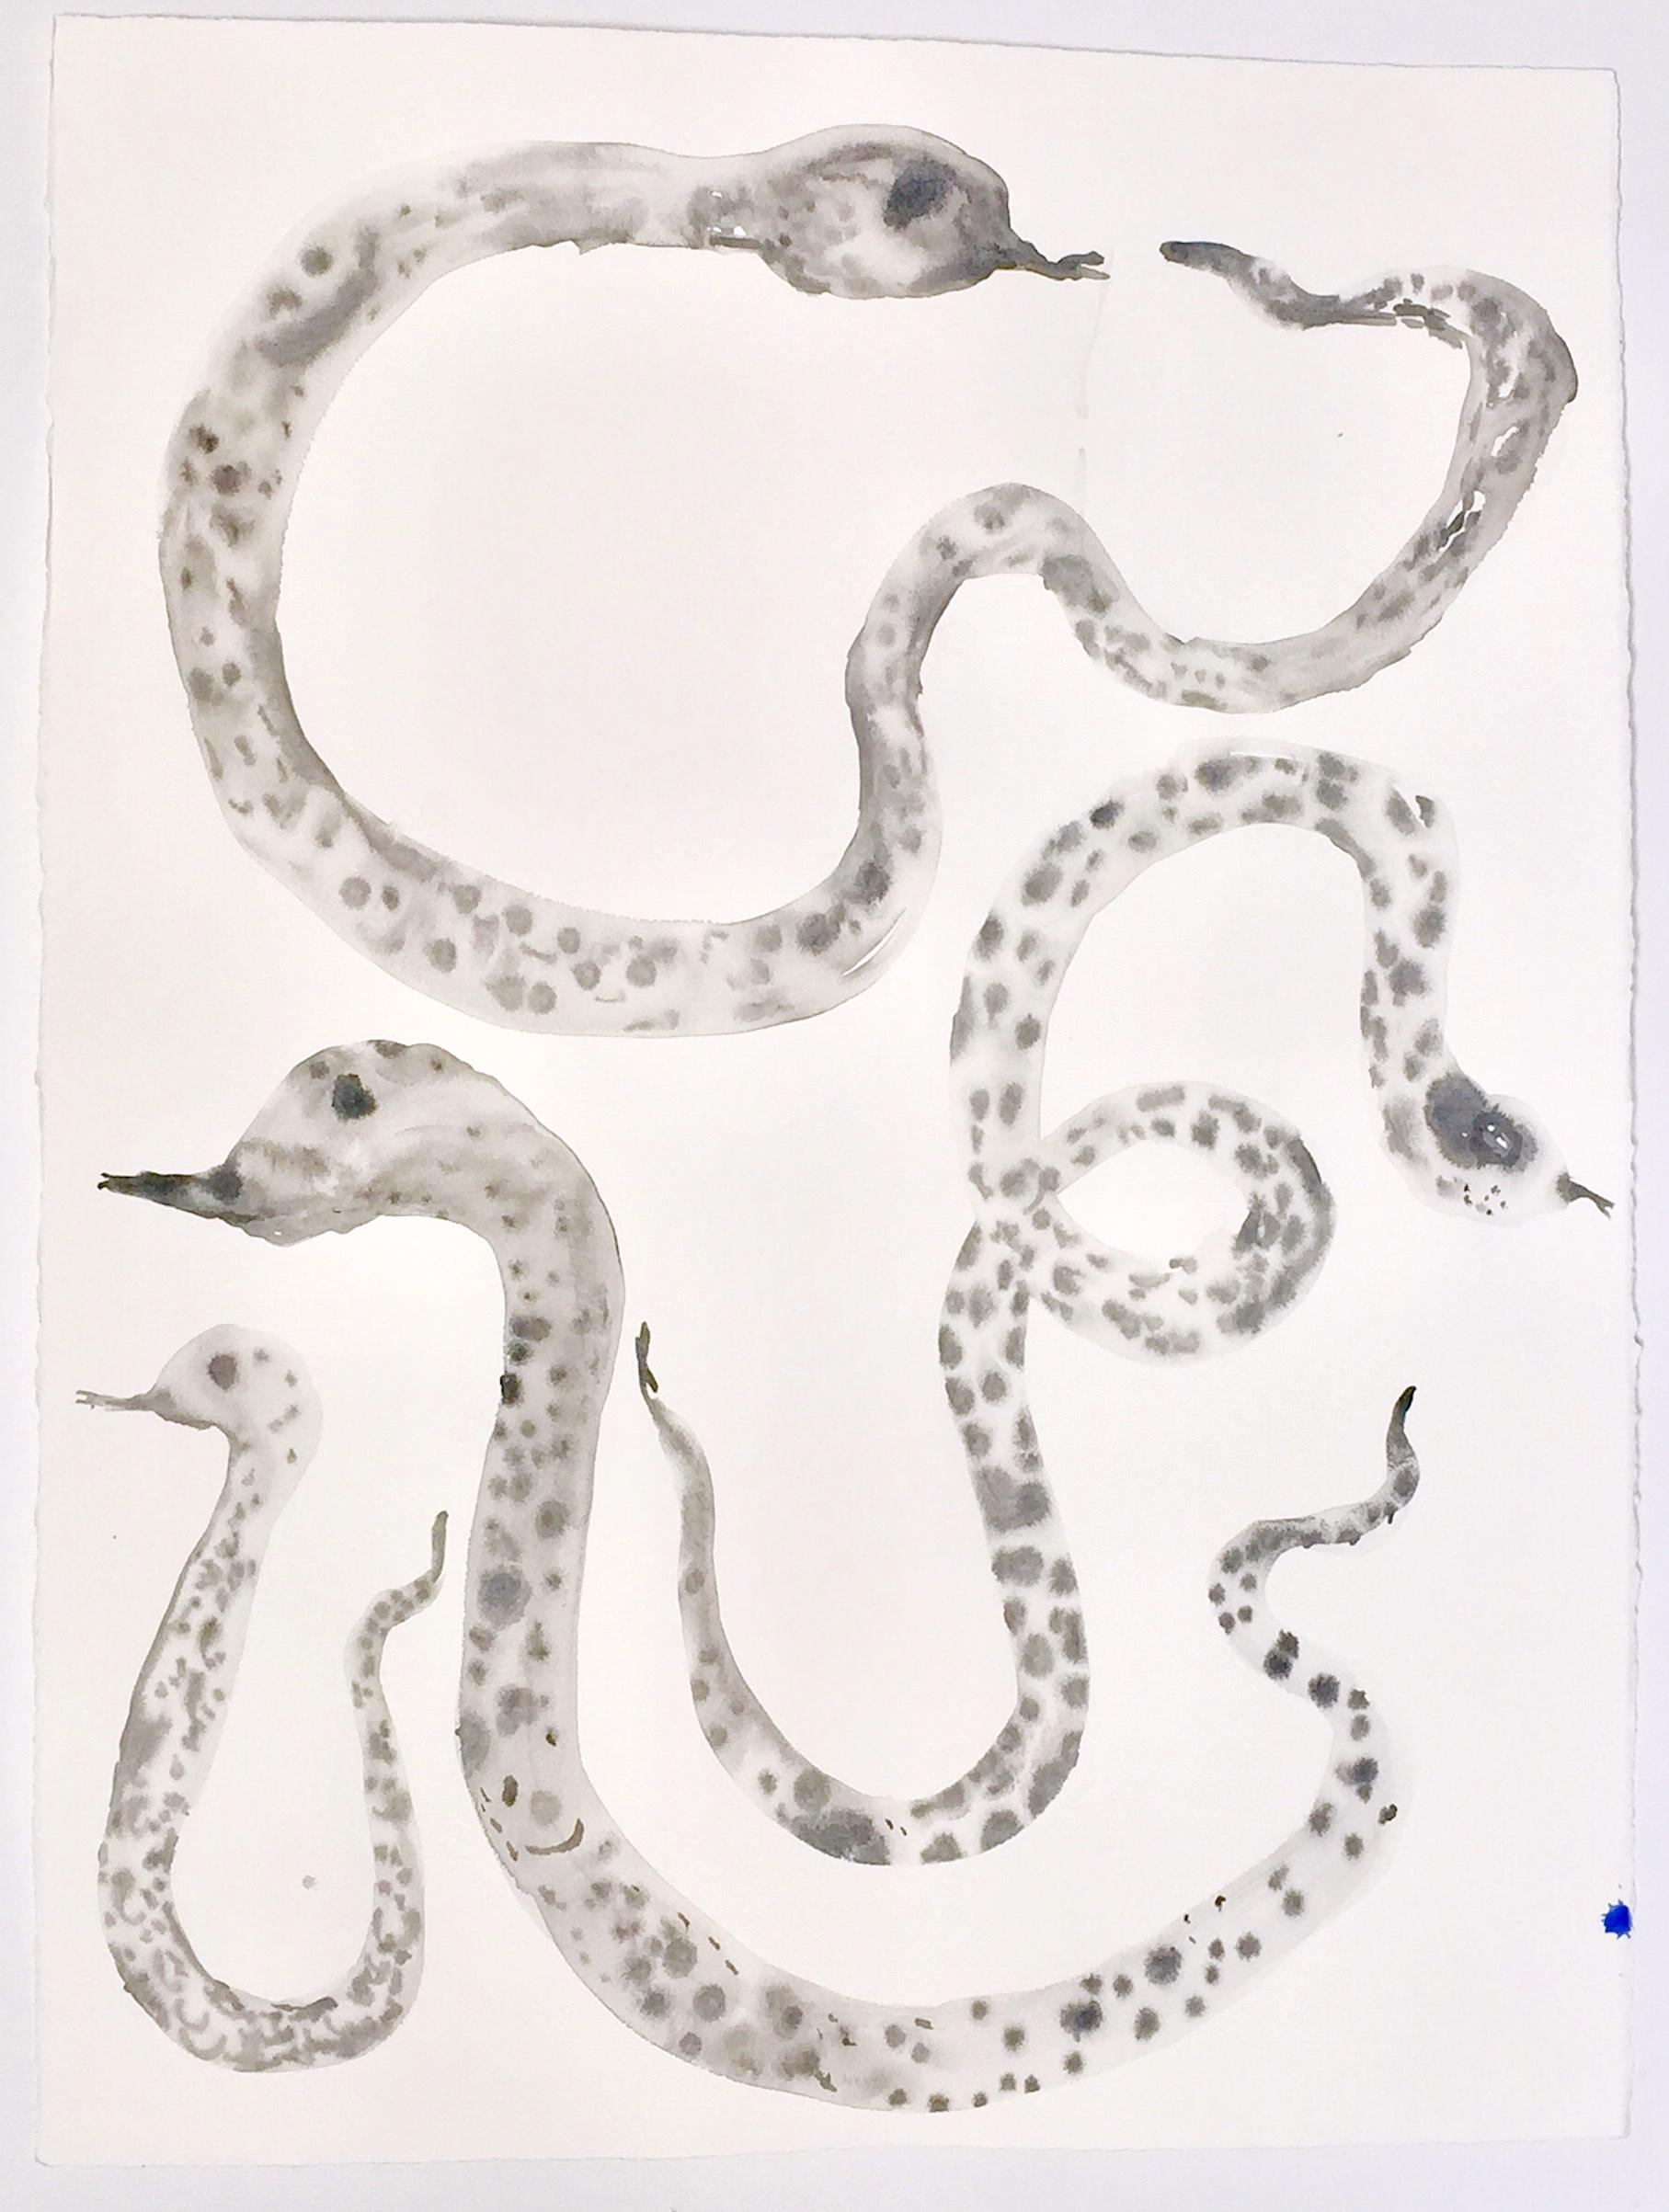 This is a black and white  monochrome painting using ink on Arches Watercolor paper.   The work is 22 x 30 inches and depicts (perhaps a family?) four snakes.
I started the snakes paintings in 2020. Previously I had incorporated in my large works on